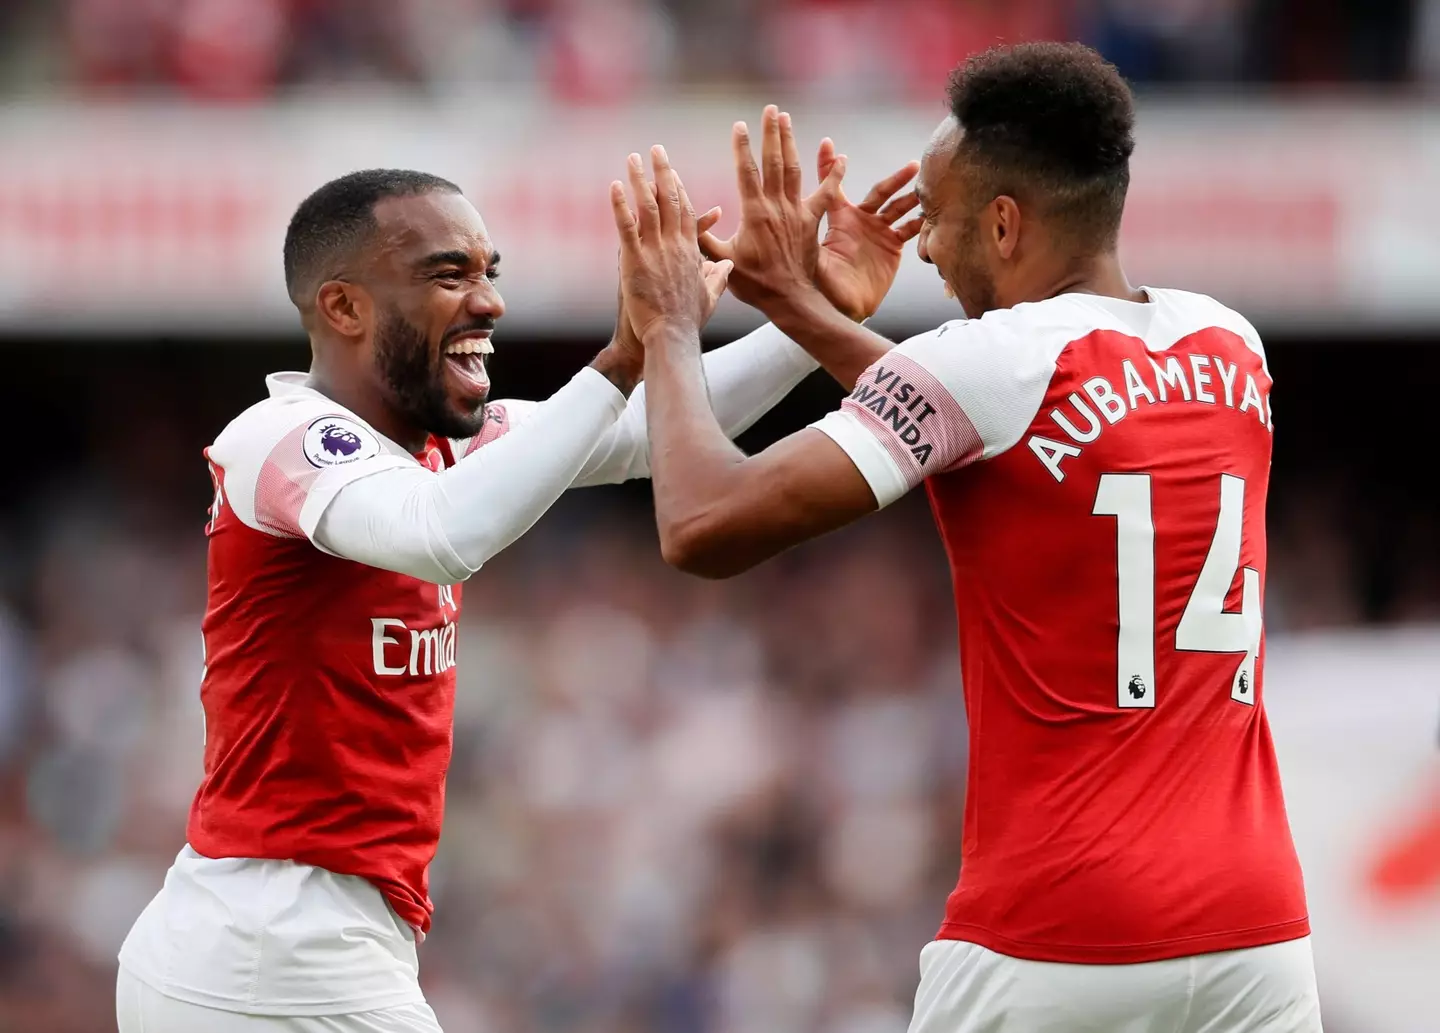 Arsenal's Pierre-Emerick Aubameyang and Alexandre Lacazette will be sidelined again due to illness